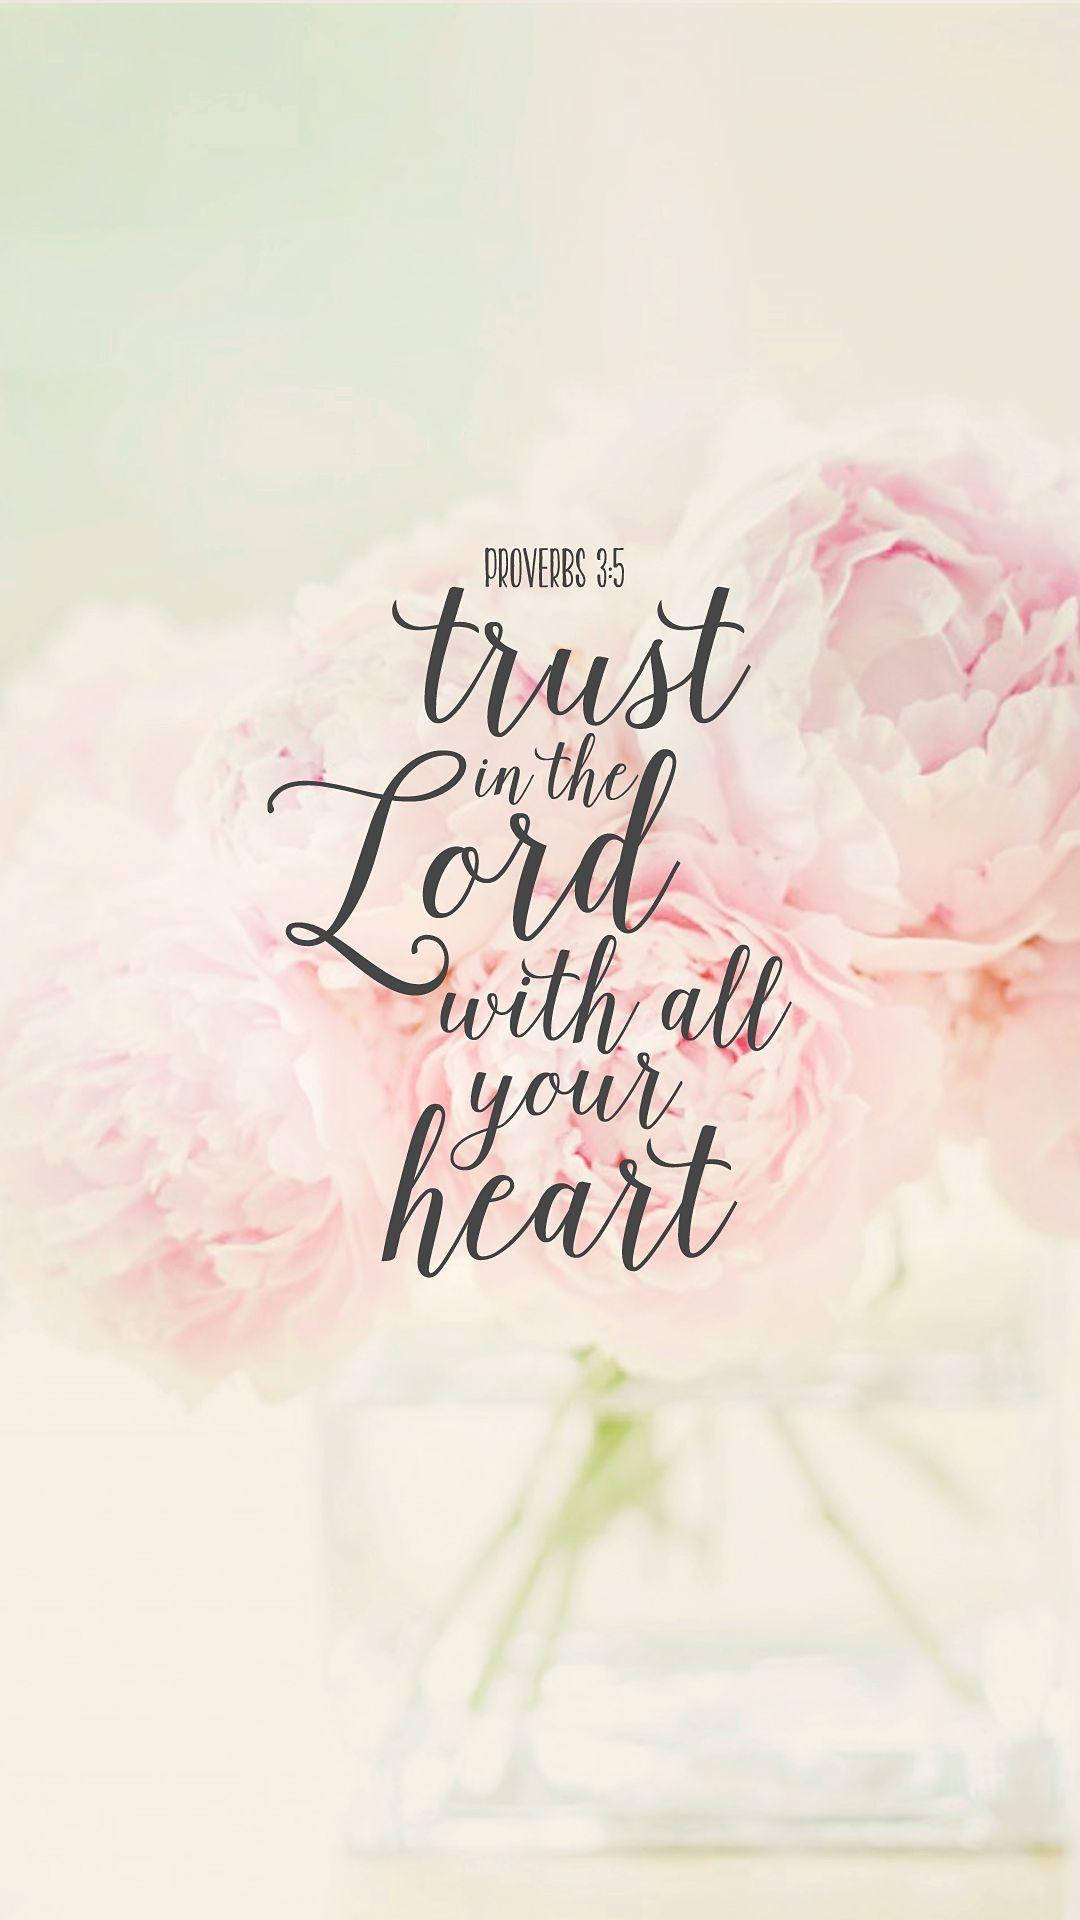 Aesthetic Bible Verse Proverbs 3:5 Background